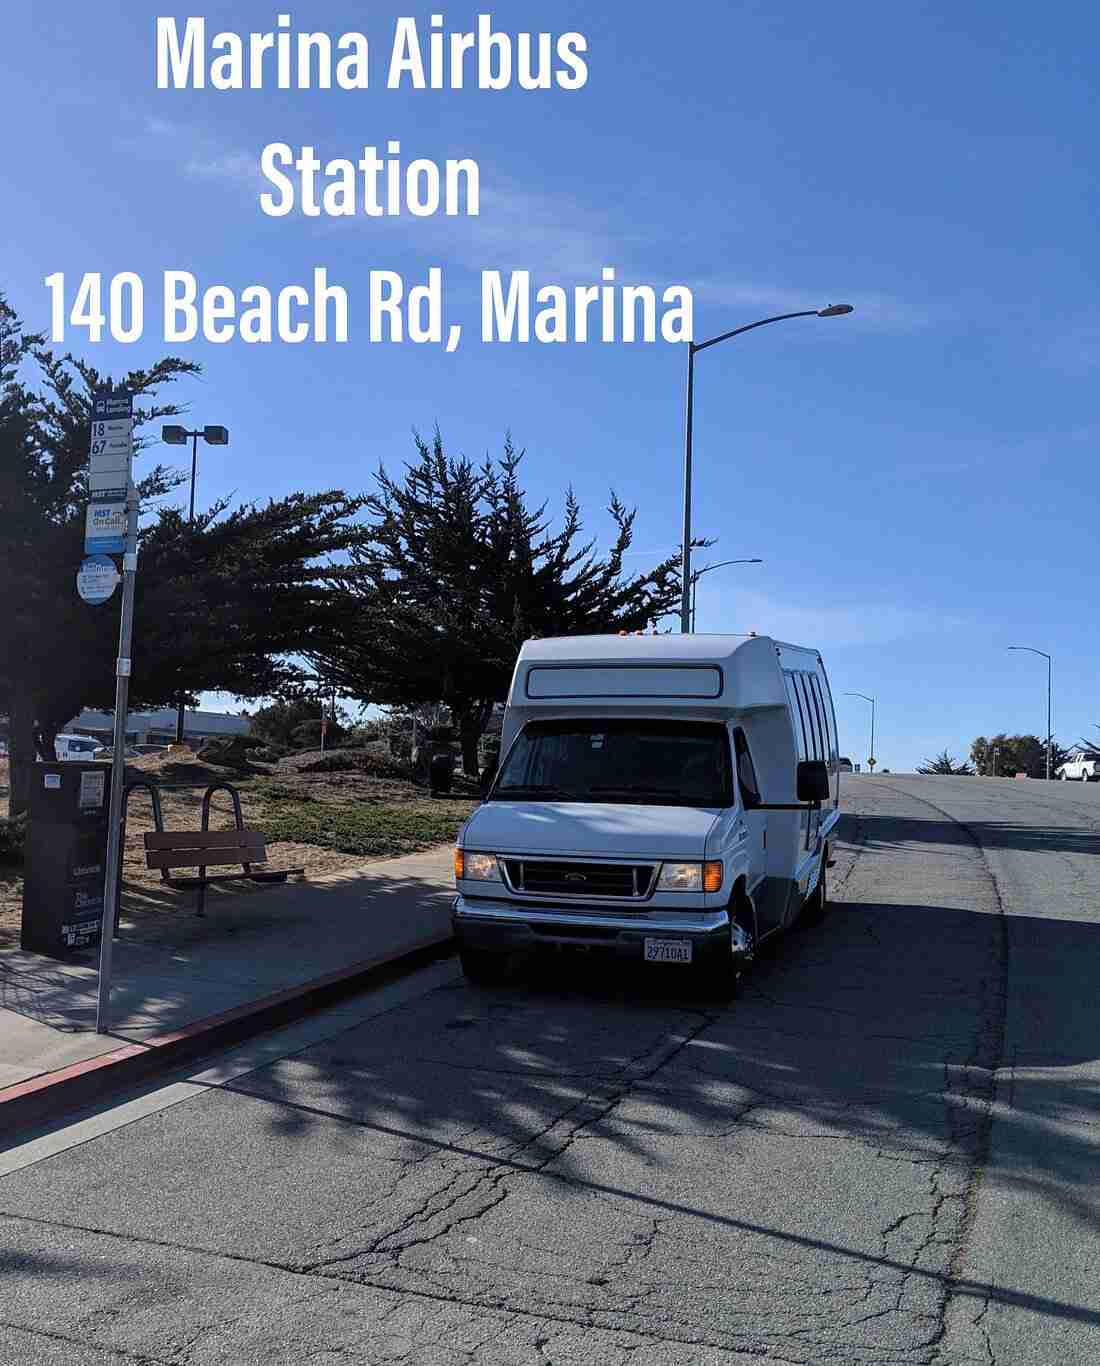 Monterey Airbus shuttle van parked at the designated Marina pick-up location, ready for boarding passengers.